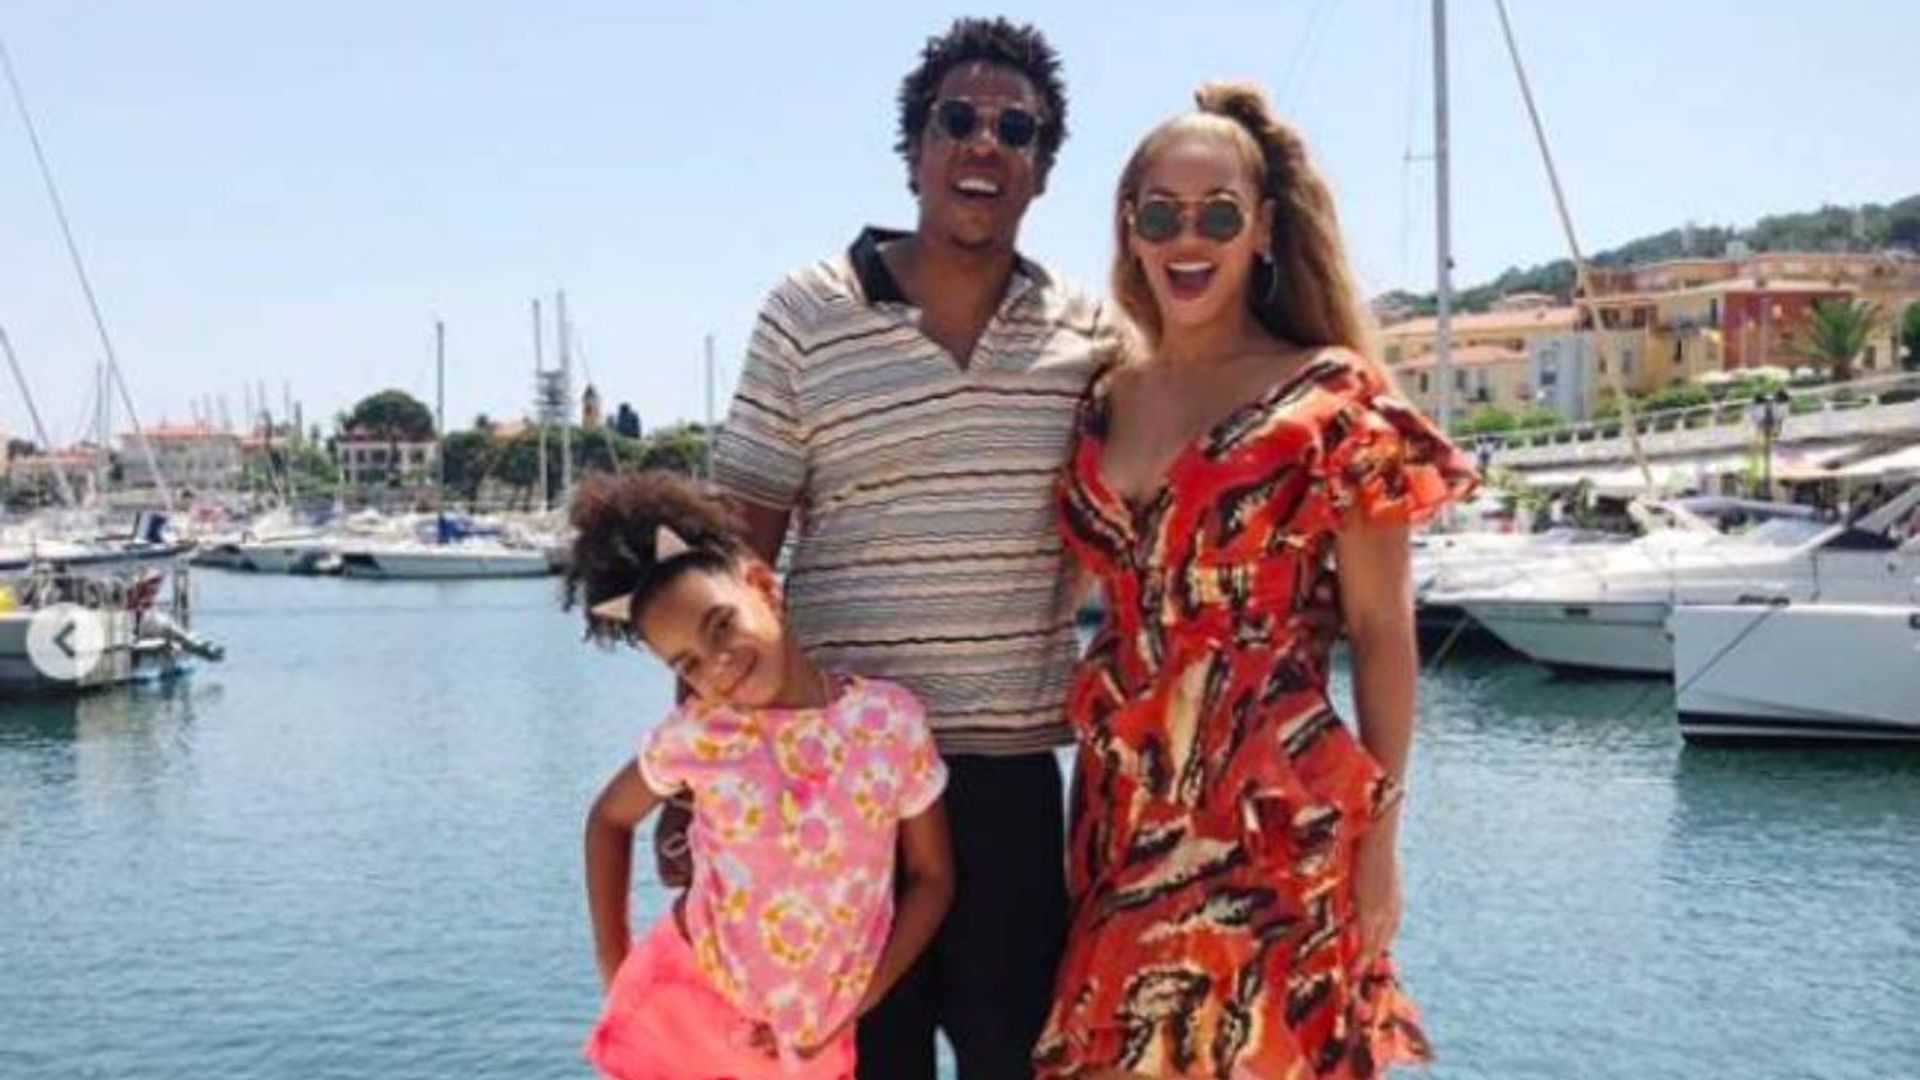 Beyoncé's daughter Blue Ivy as you've never seen her before in adorable new video